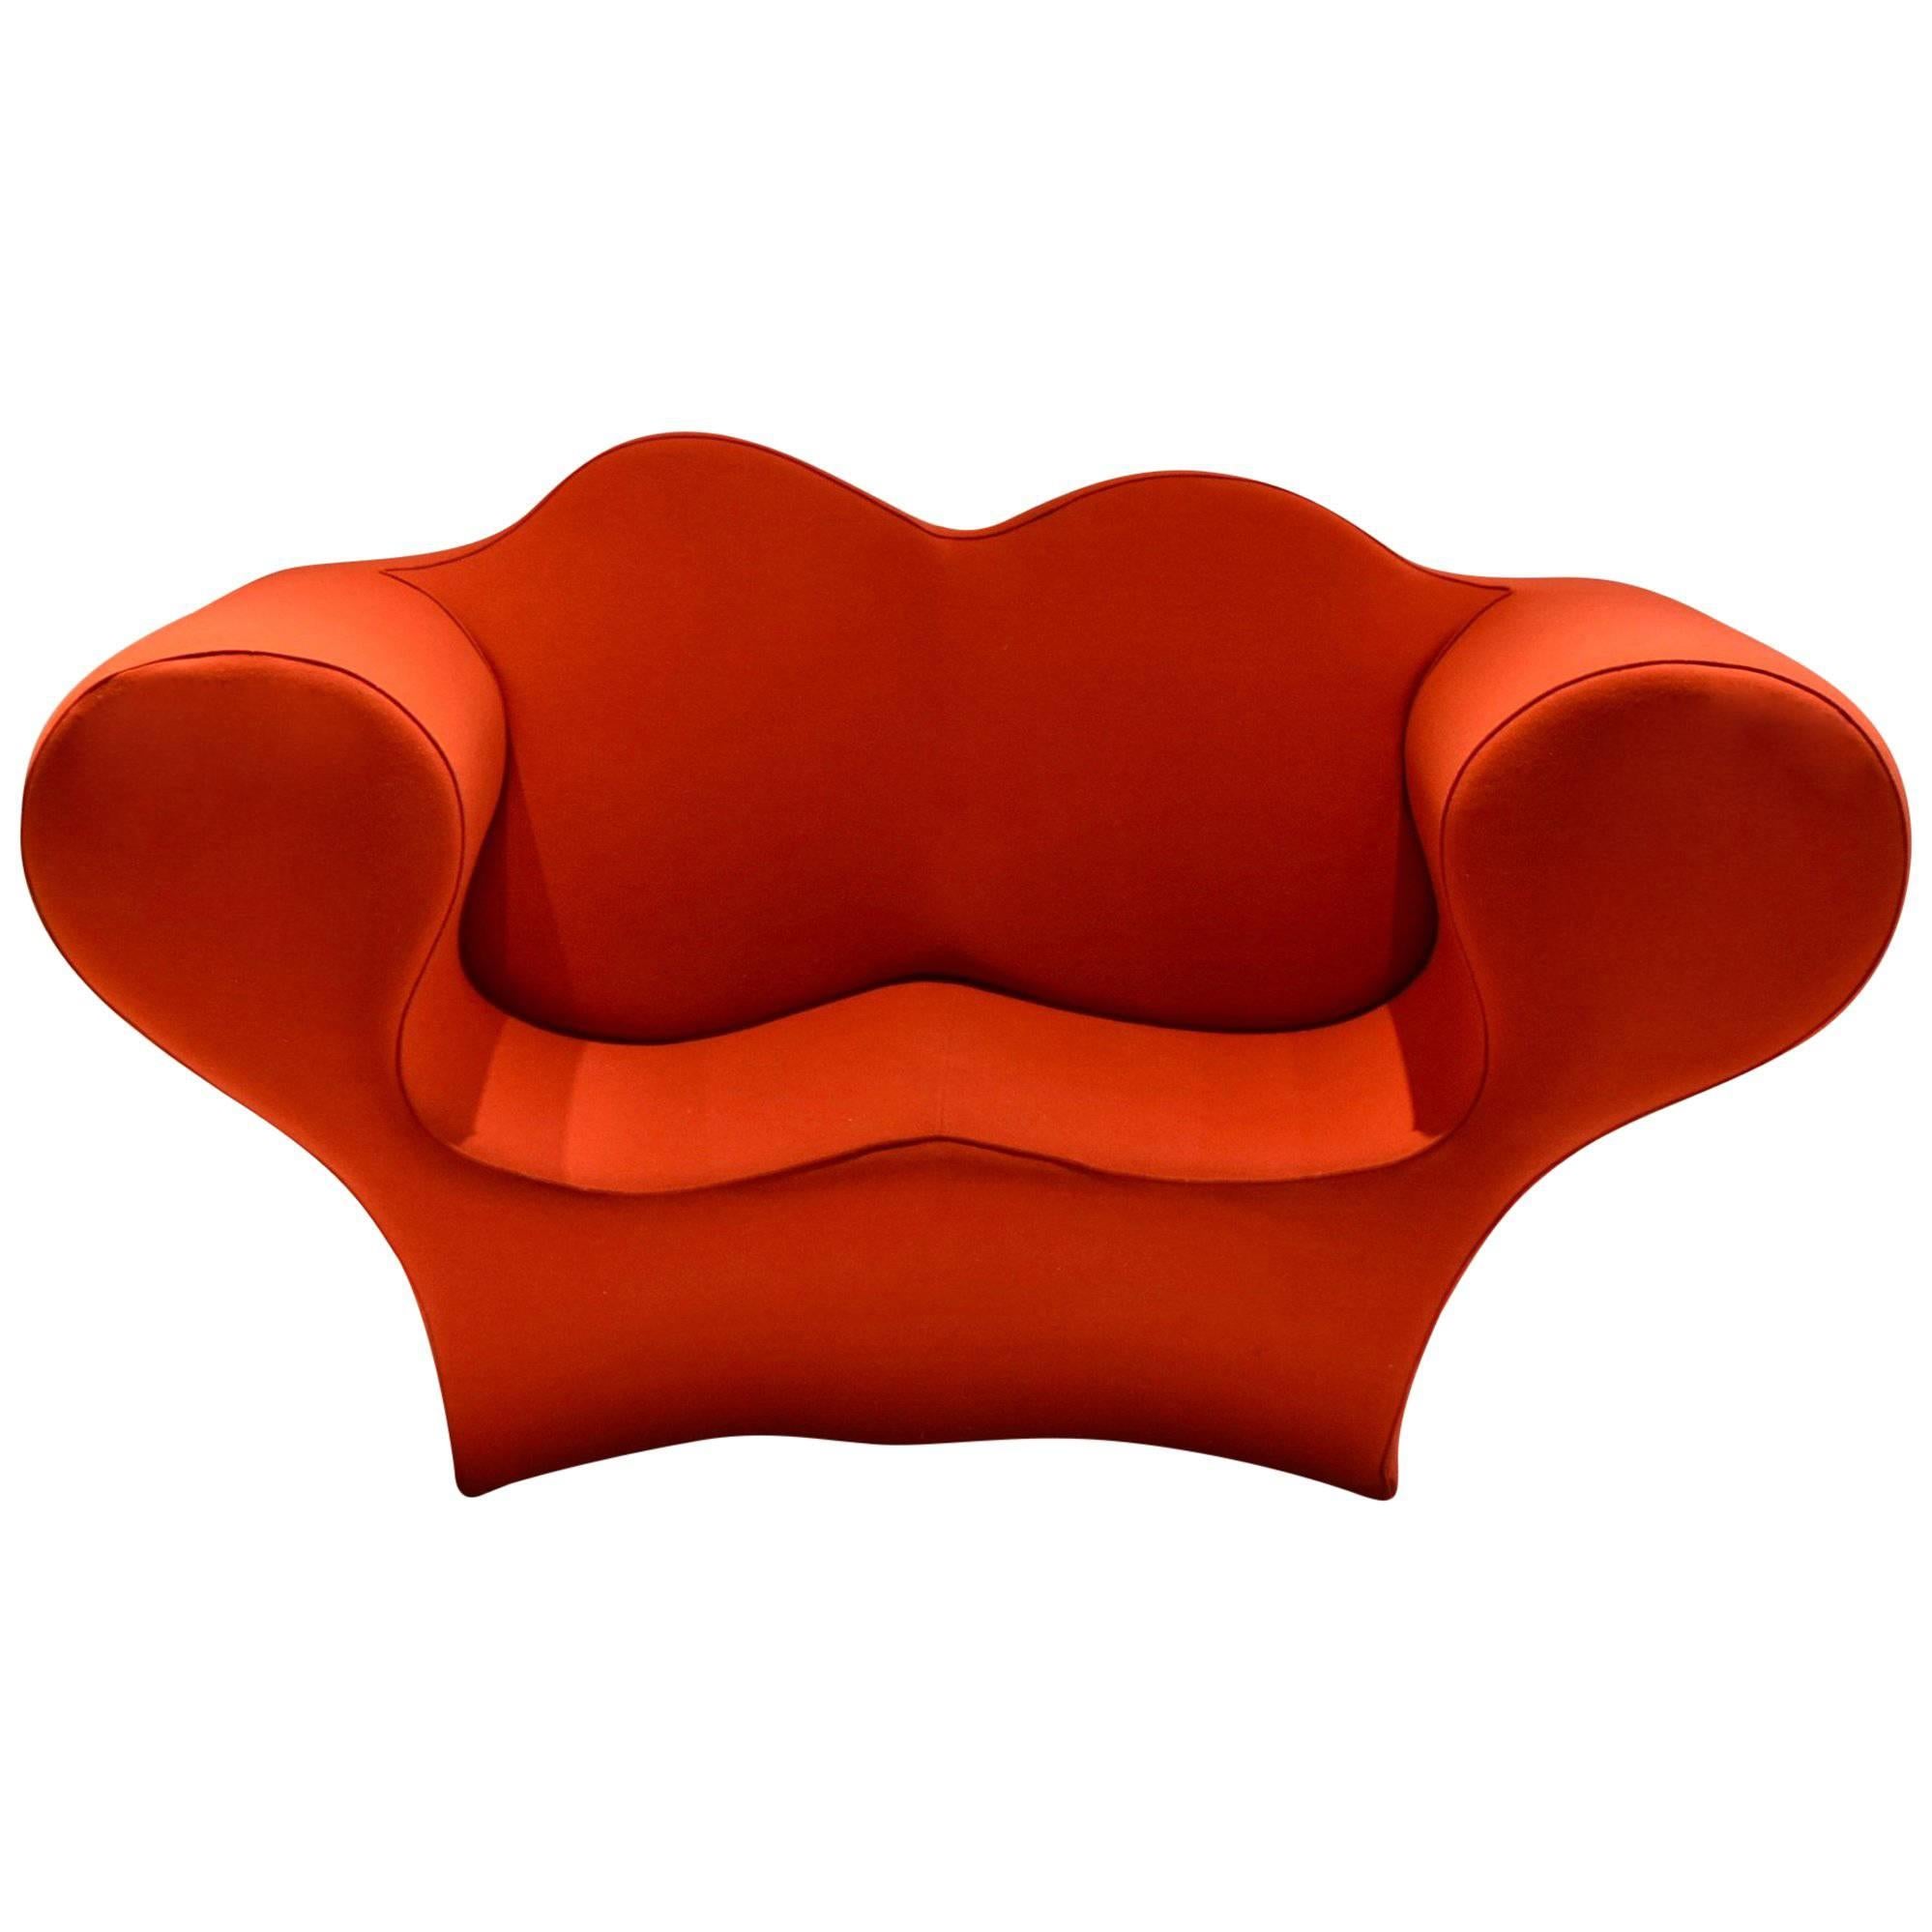 Double Soft Big Easy Settee by Ron Arad for Moroso, 1991, Italy